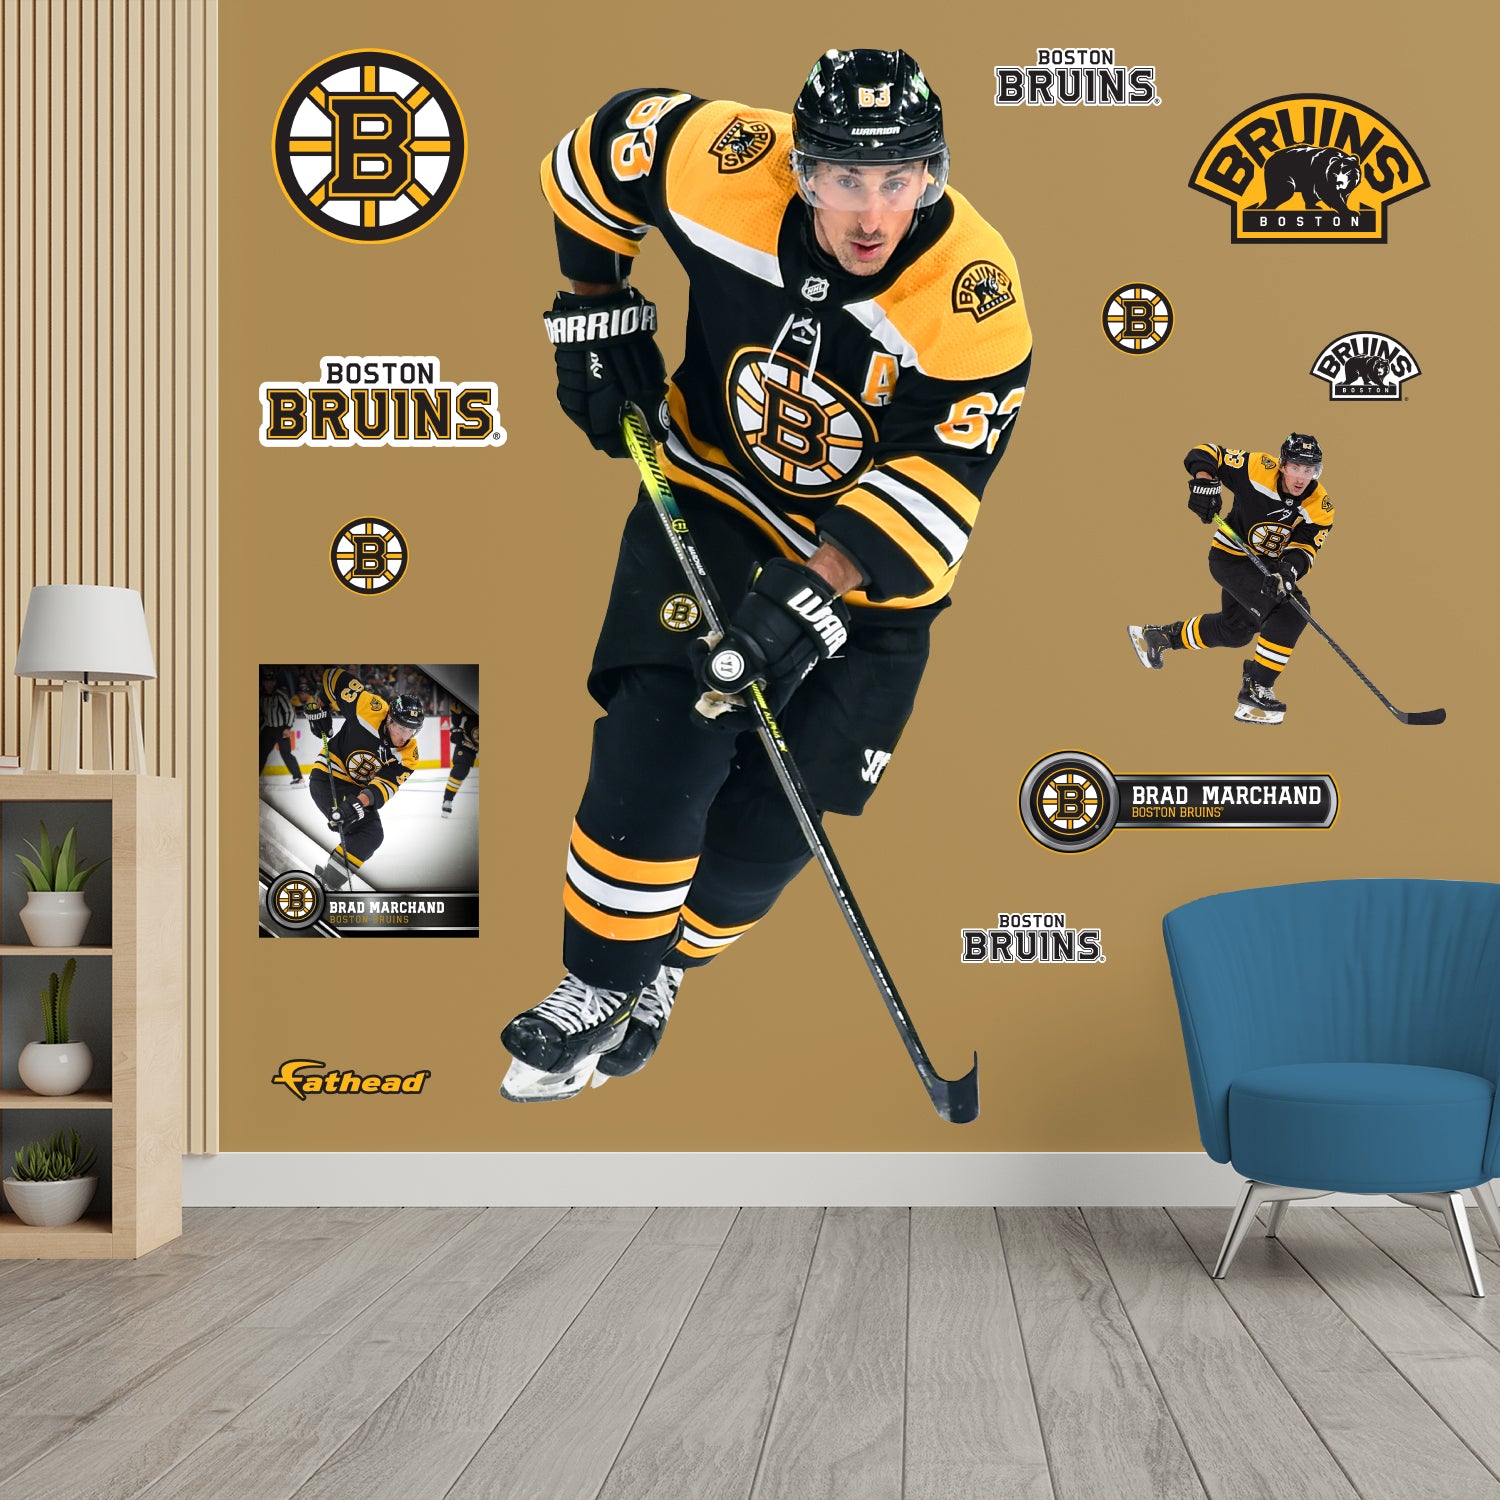 Boston Bruins stand in the NHL store